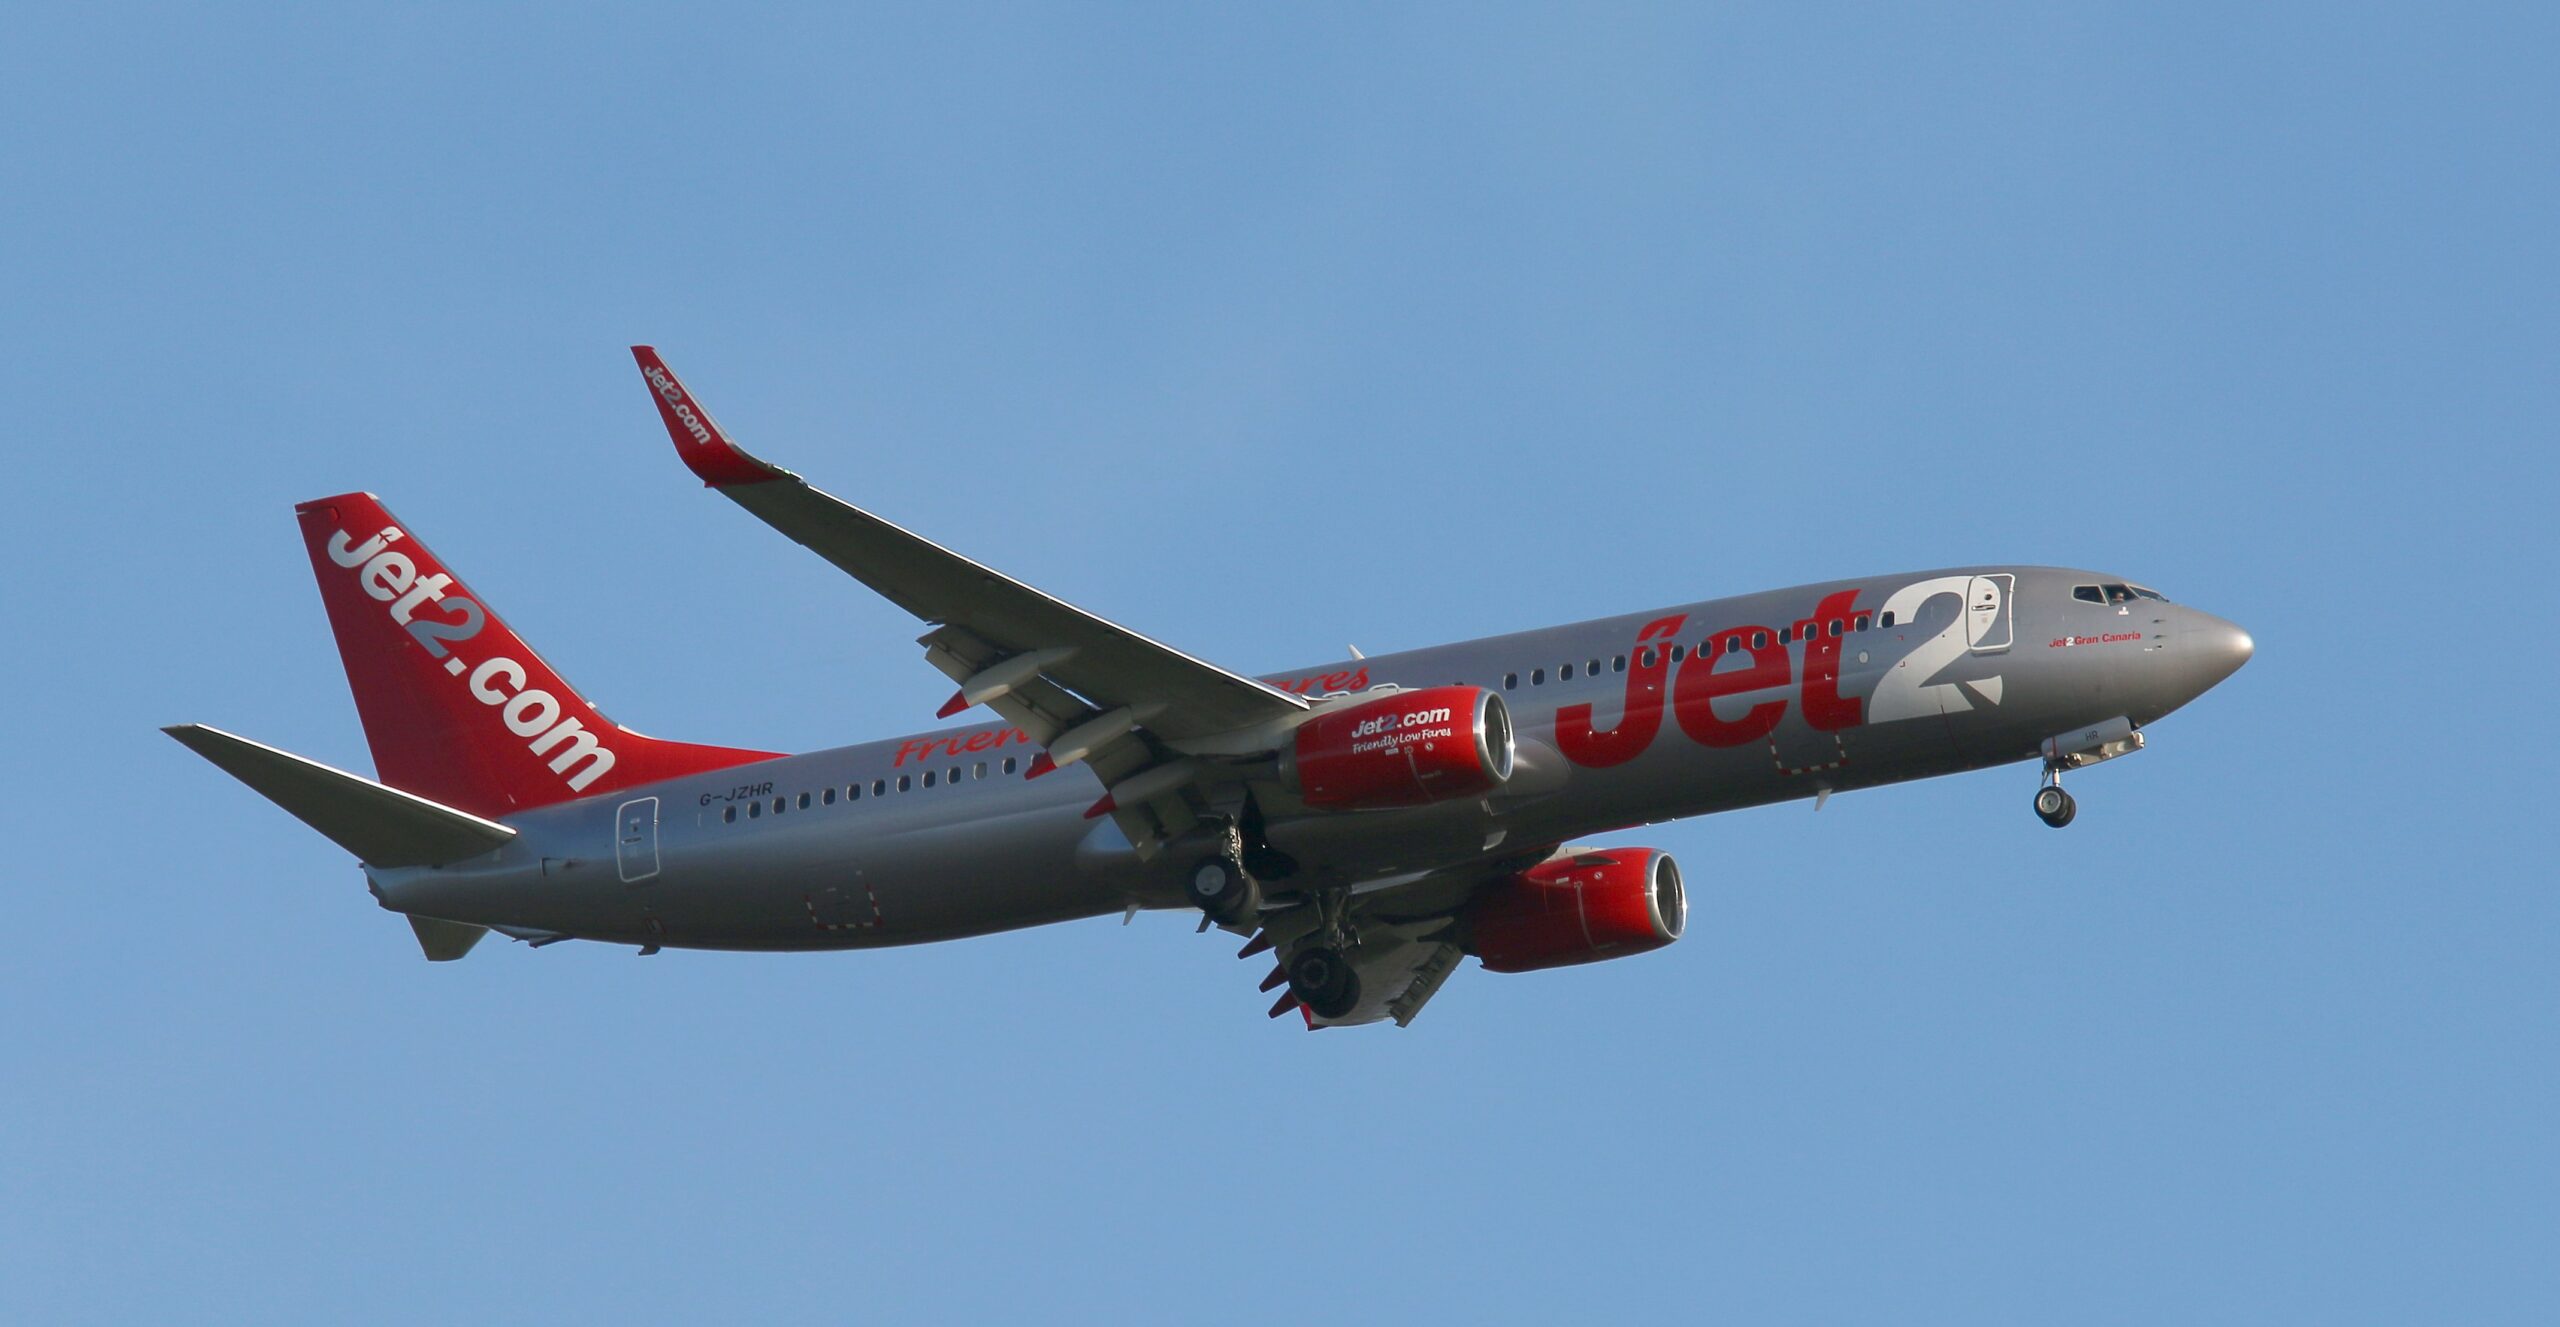 A Jet2 Boeing 737 on approach to London Stansted.